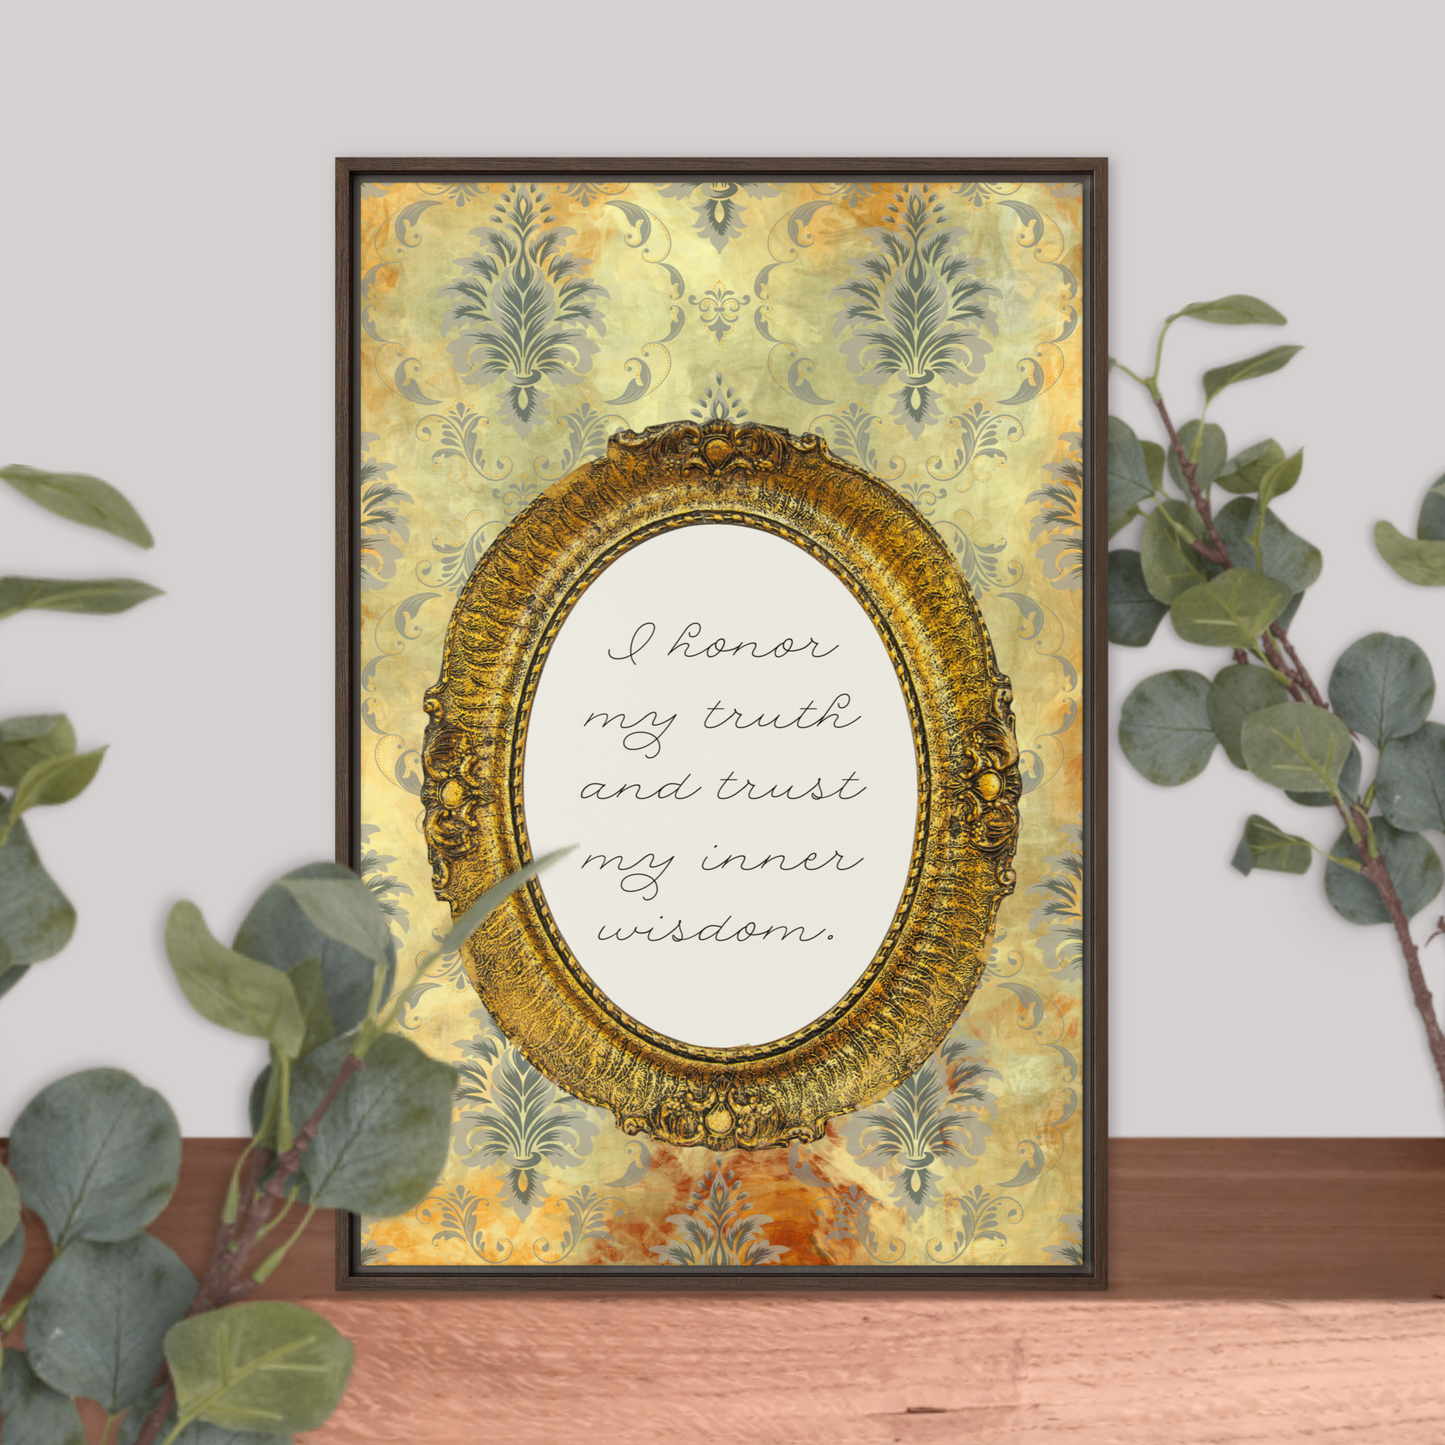 Vintage Feminine Mantras Wall Art – 'Trust Yourself, Honor Your Truth'